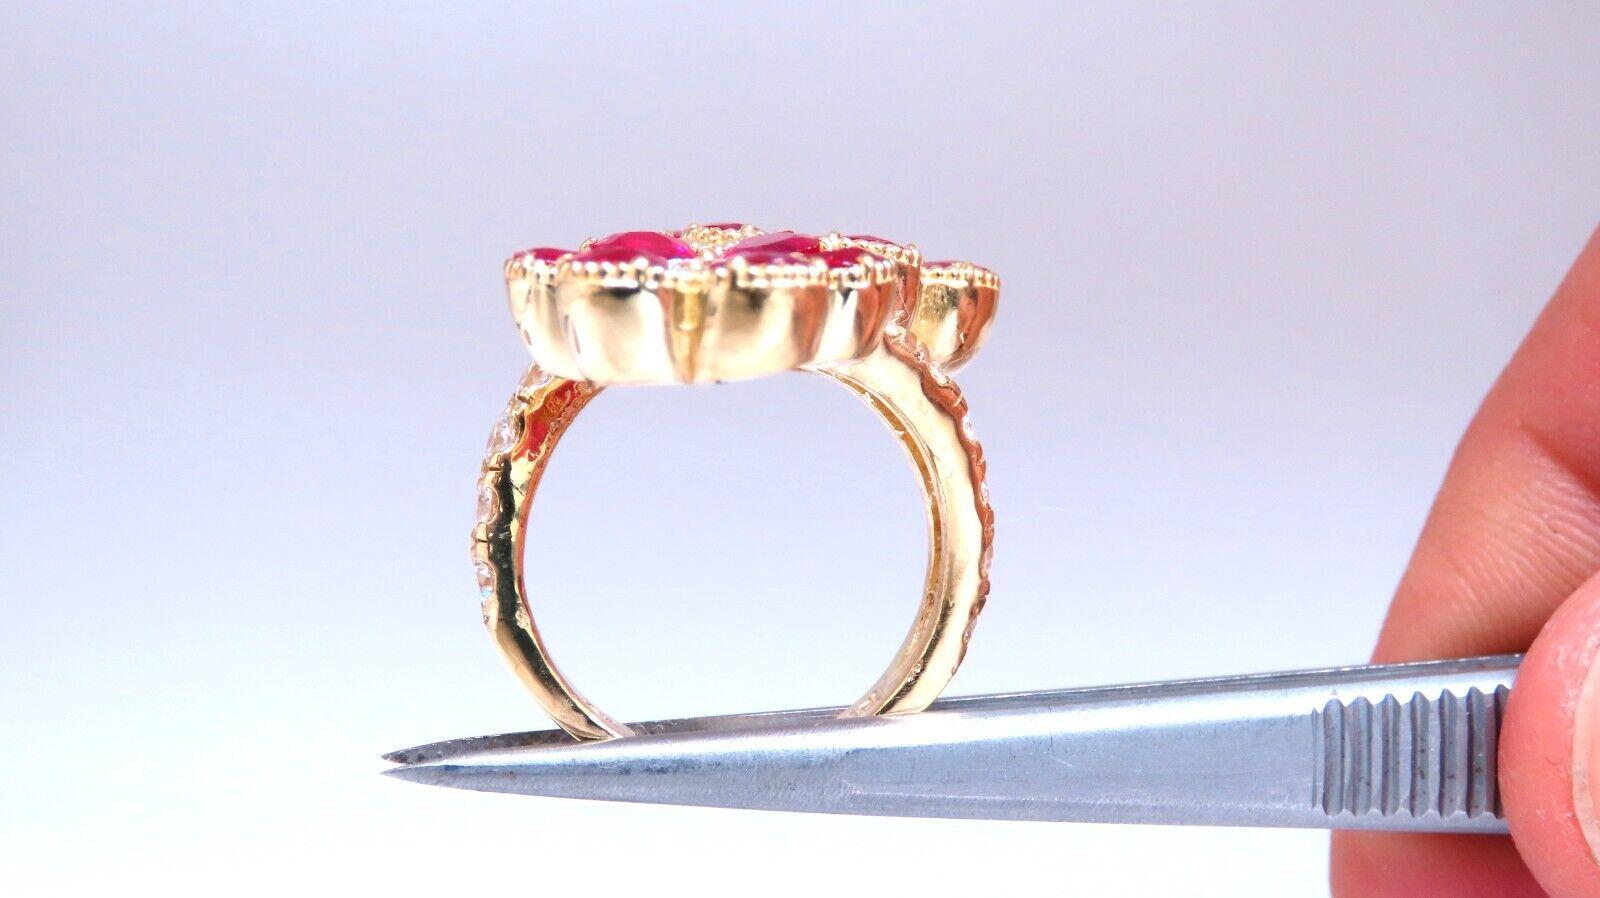 5.20ct Natural Rubies Ring.

Pear Brilliant Cut

5 x 3 mm each

1.05ct. Side round Diamonds:

G-color Vs-2 clarity.

18kt. yellow gold

12.3 grams.

current ring size: 6.25

May be resized, please inquire. 

$20,000 Appraisal Certificate to accompany